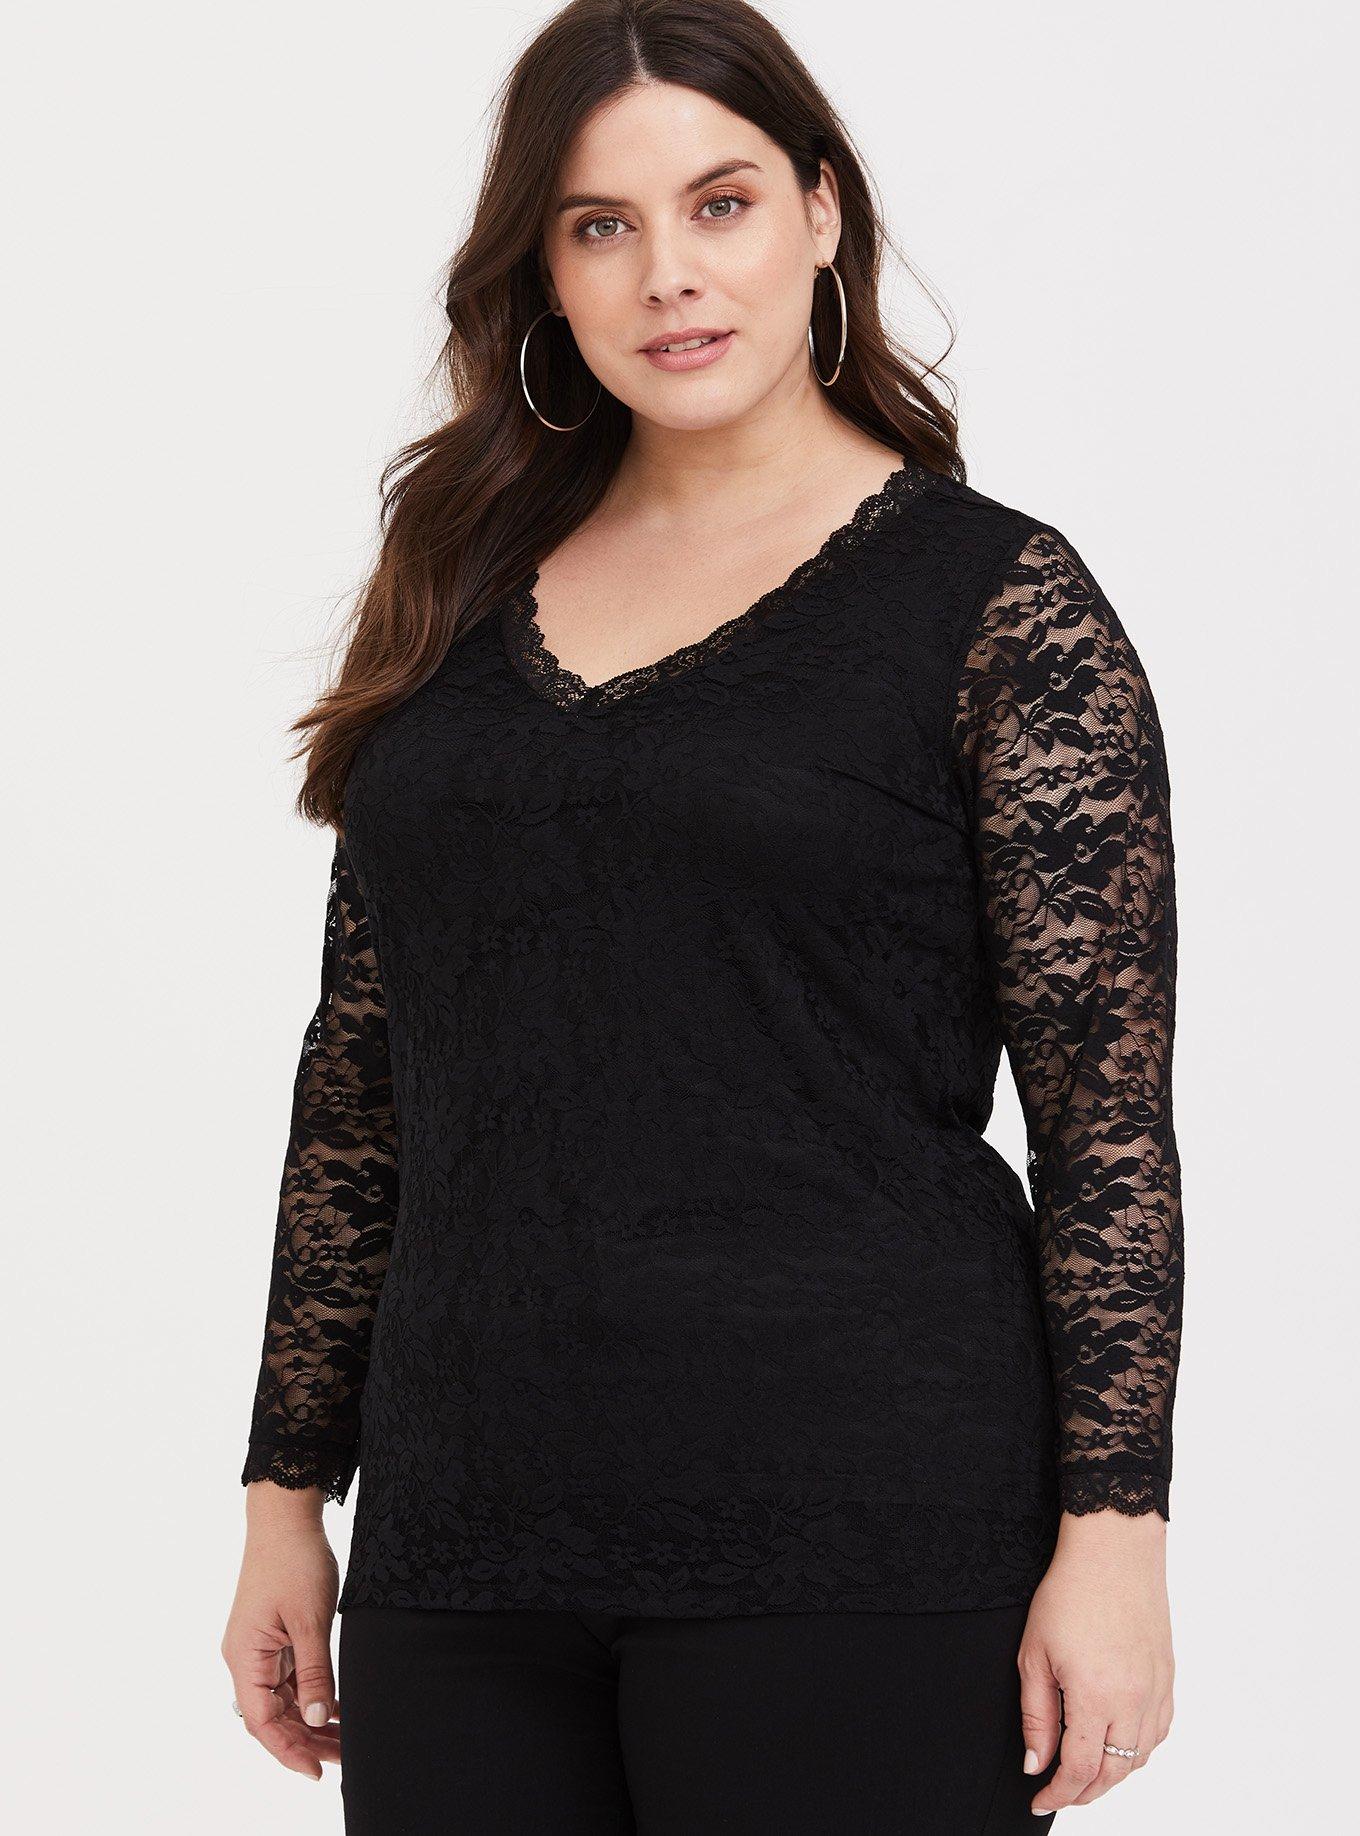 Torrid black blouse with key hole front and back and black lace sleeves!